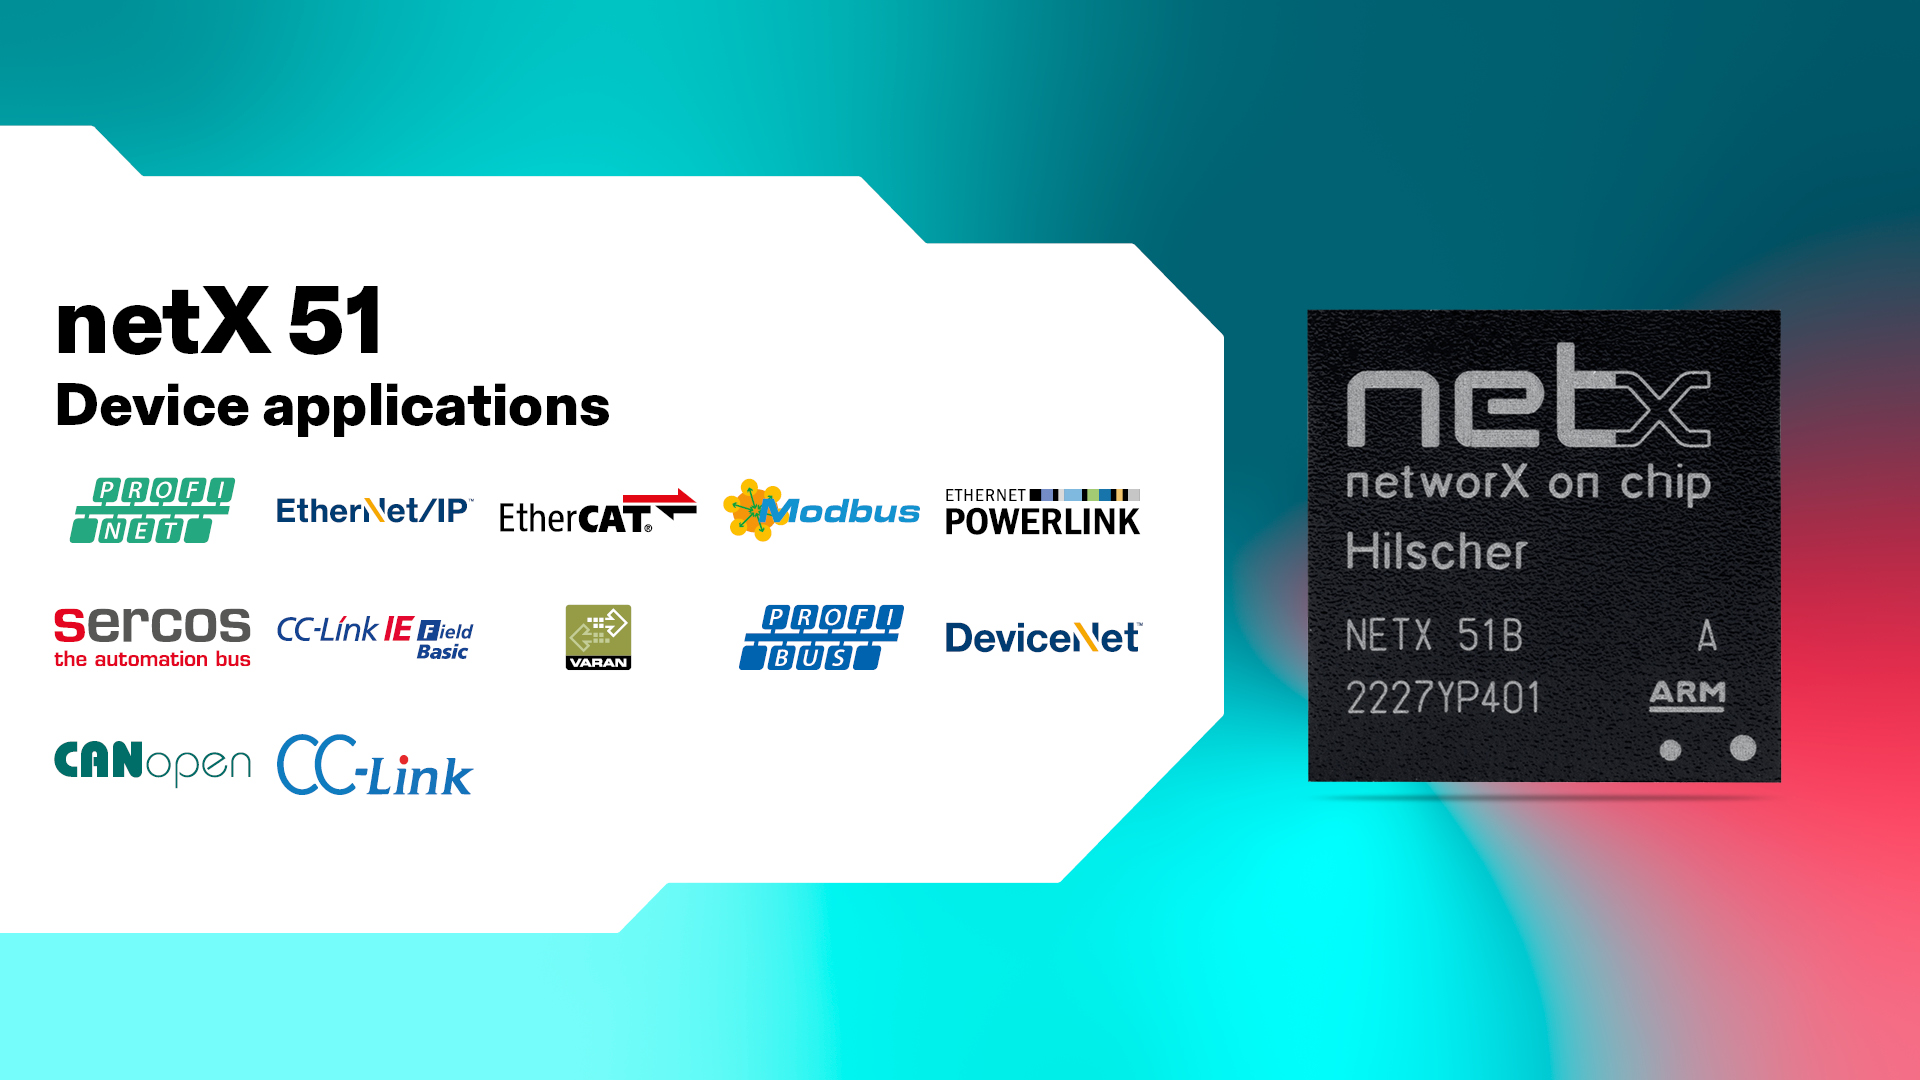 A netX 51 graphic in black on the right side on colorful background. Numerous protocol logos on a white background in an angular form on the left.